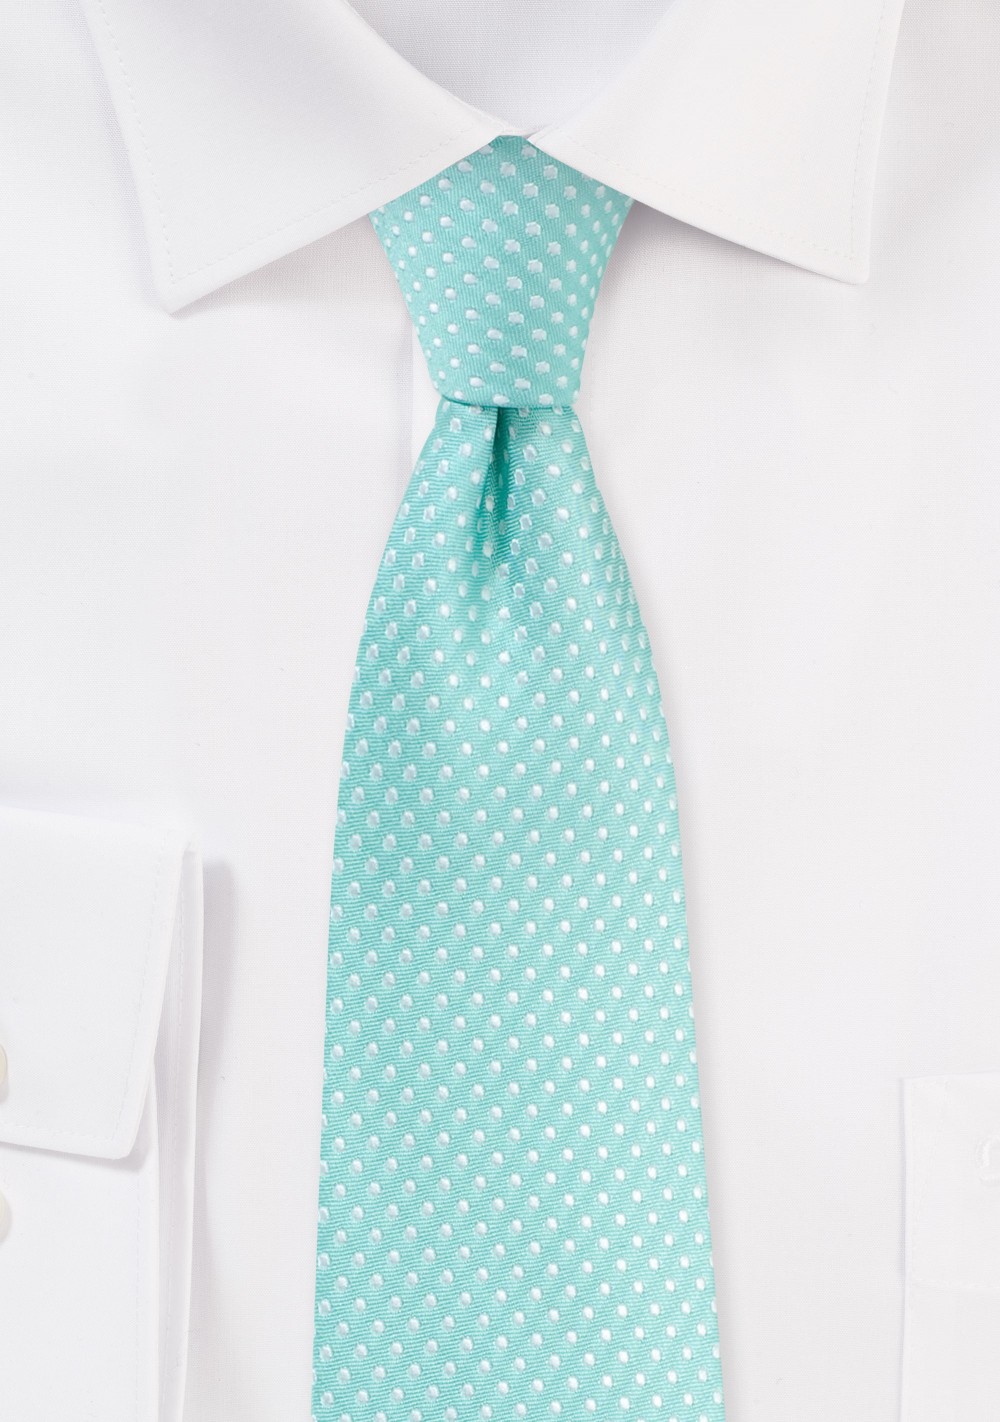 Bright Pool Colored Pin Dot Tie